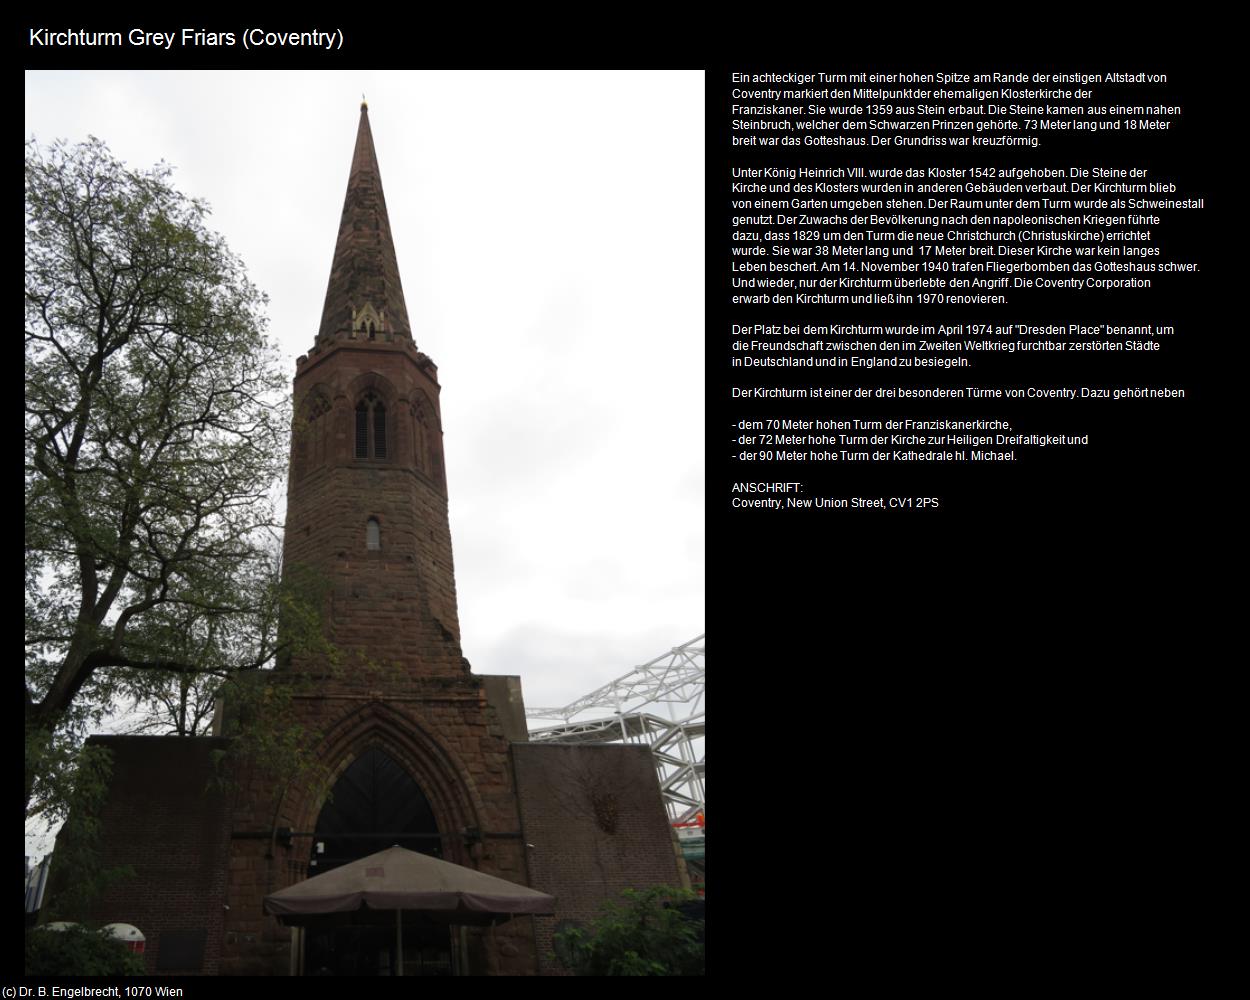 Kirchturm Grey Friars  (Coventry, England      ) in Kulturatlas-ENGLAND und WALES